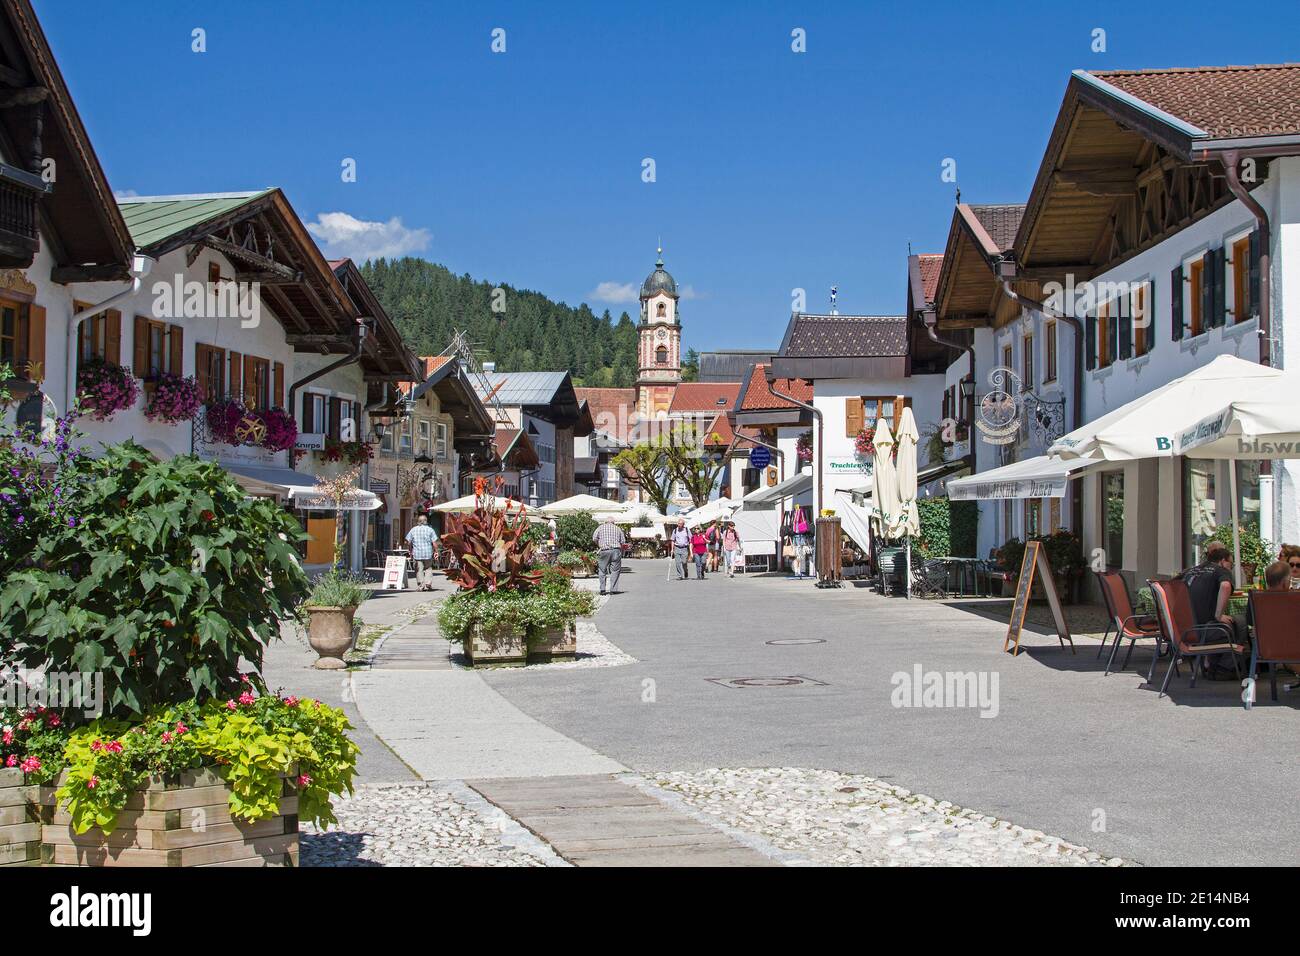 Mittenwald Is A Popular Tourist Destination In The Upper Isar Valley And Lies Between The Karwendel And The Wetterstein Mountains Stock Photo